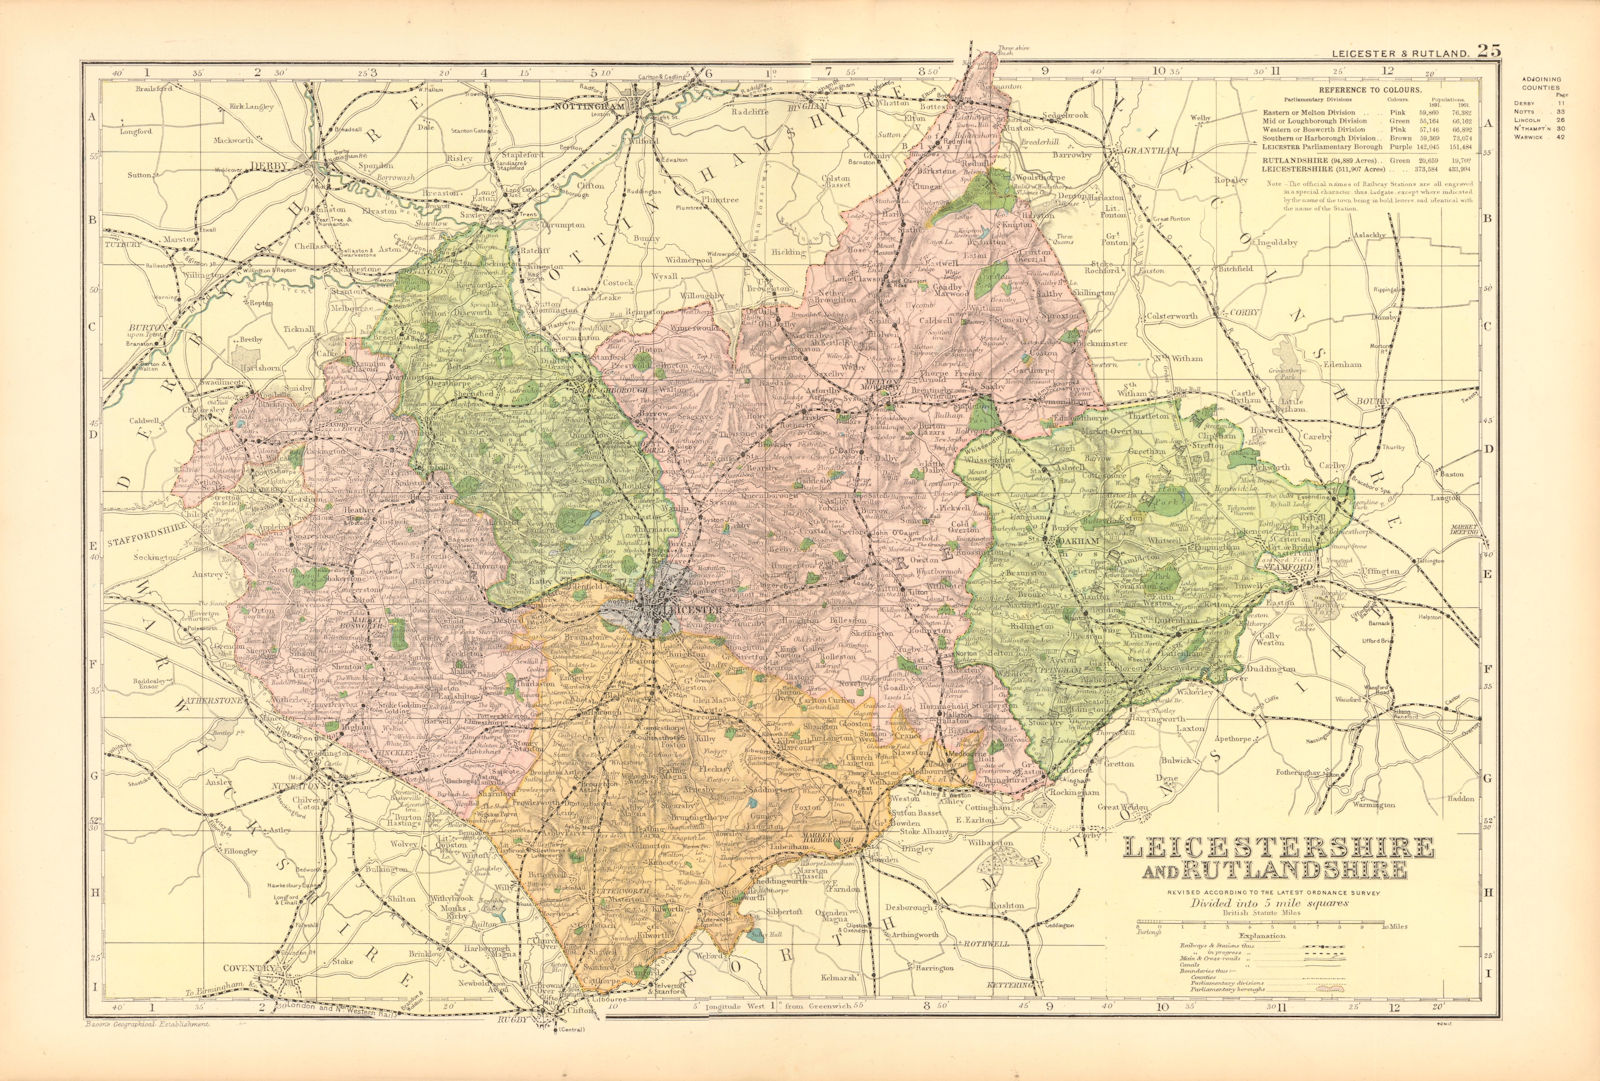 LEICESTERSHIRE AND RUTLANDSHIRE. Parliamentary divisions & parks. BACON 1904 map